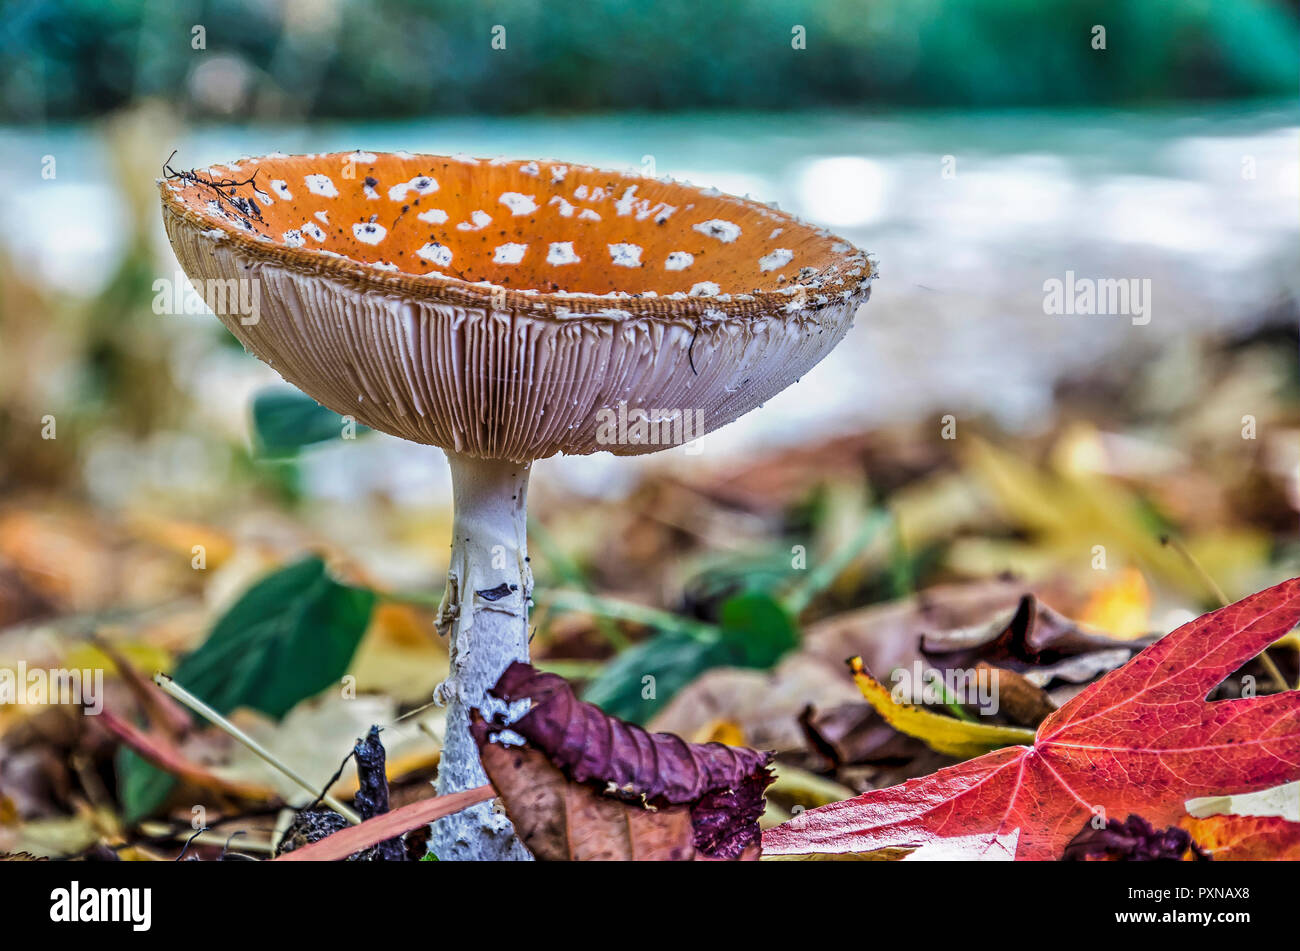 Single mushroom with a depressed cap, red with white dots and white gills growing on soil covered with various kinds of autumn leaves in a garden in o Stock Photo